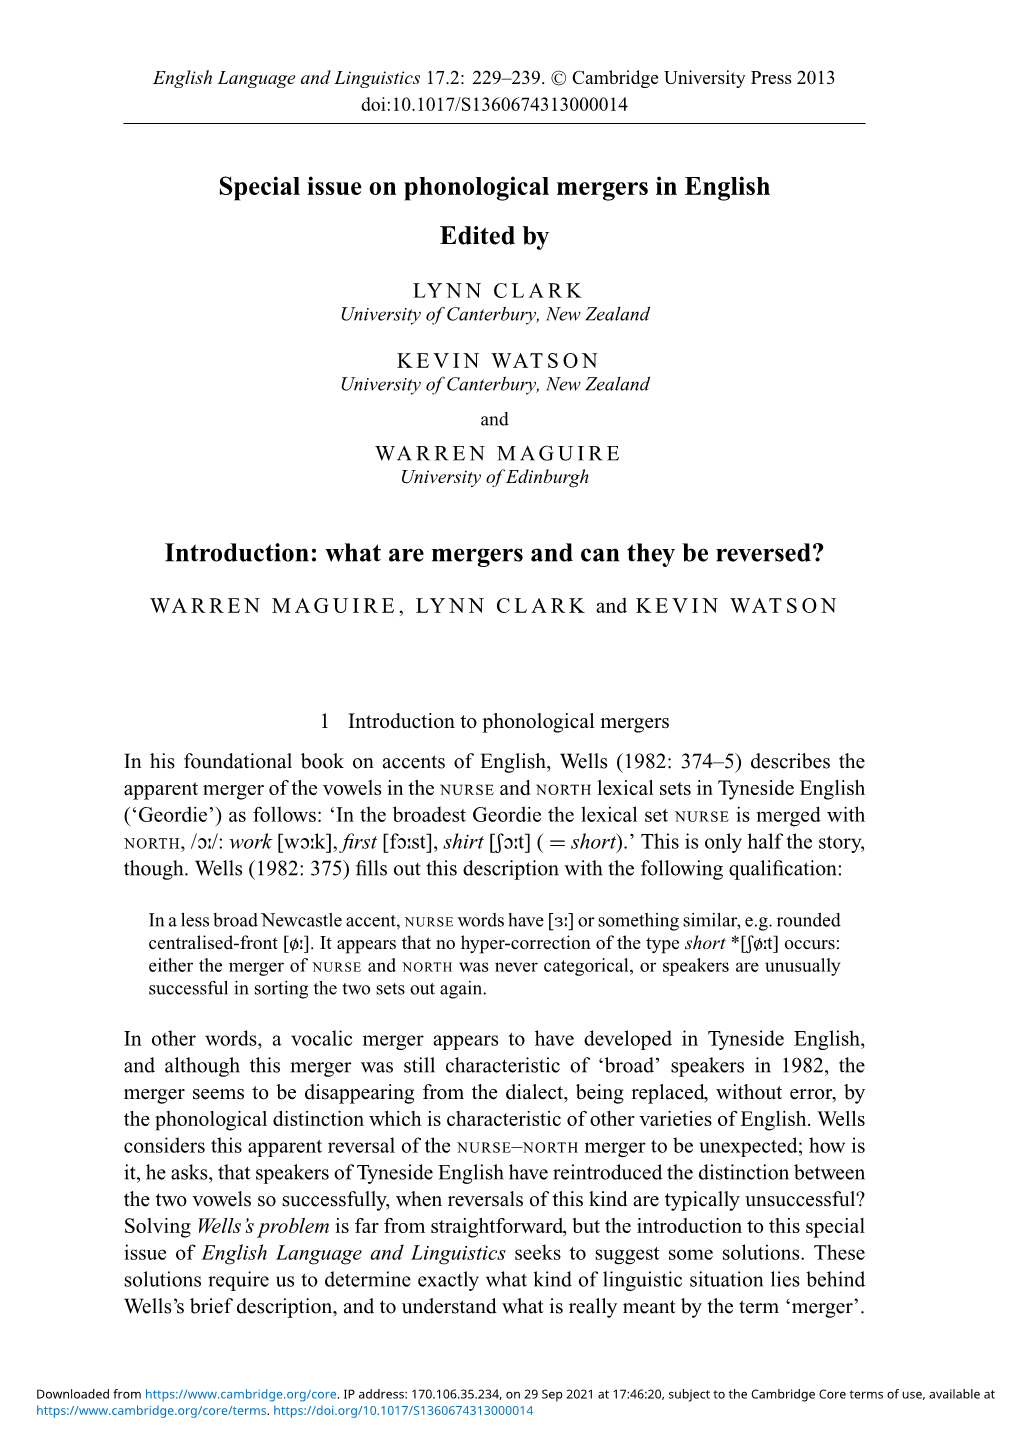 Special Issue on Phonological Mergers in English Edited By